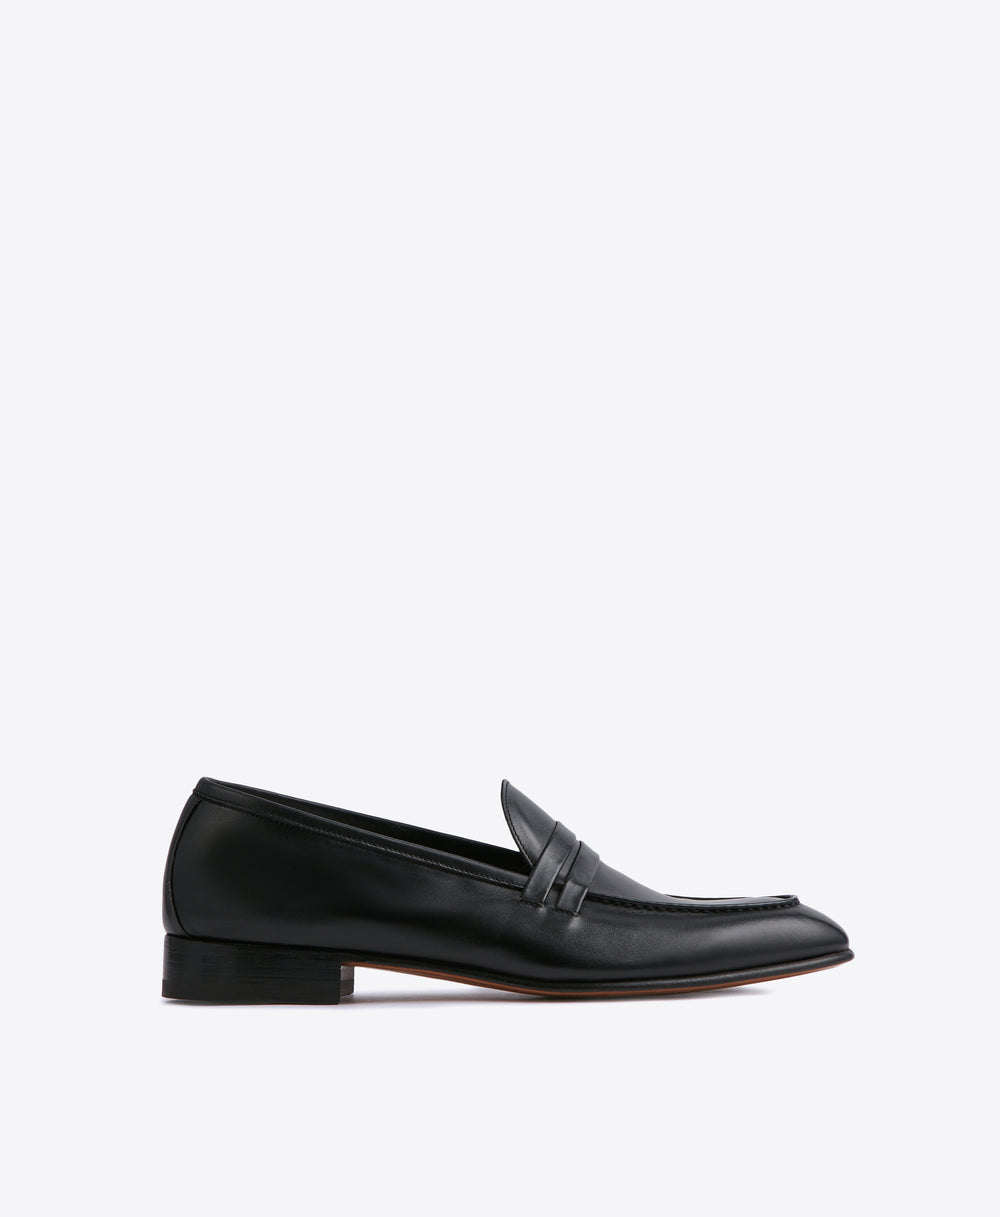 Men's Black Leather Flat Loafers Malone Souliers